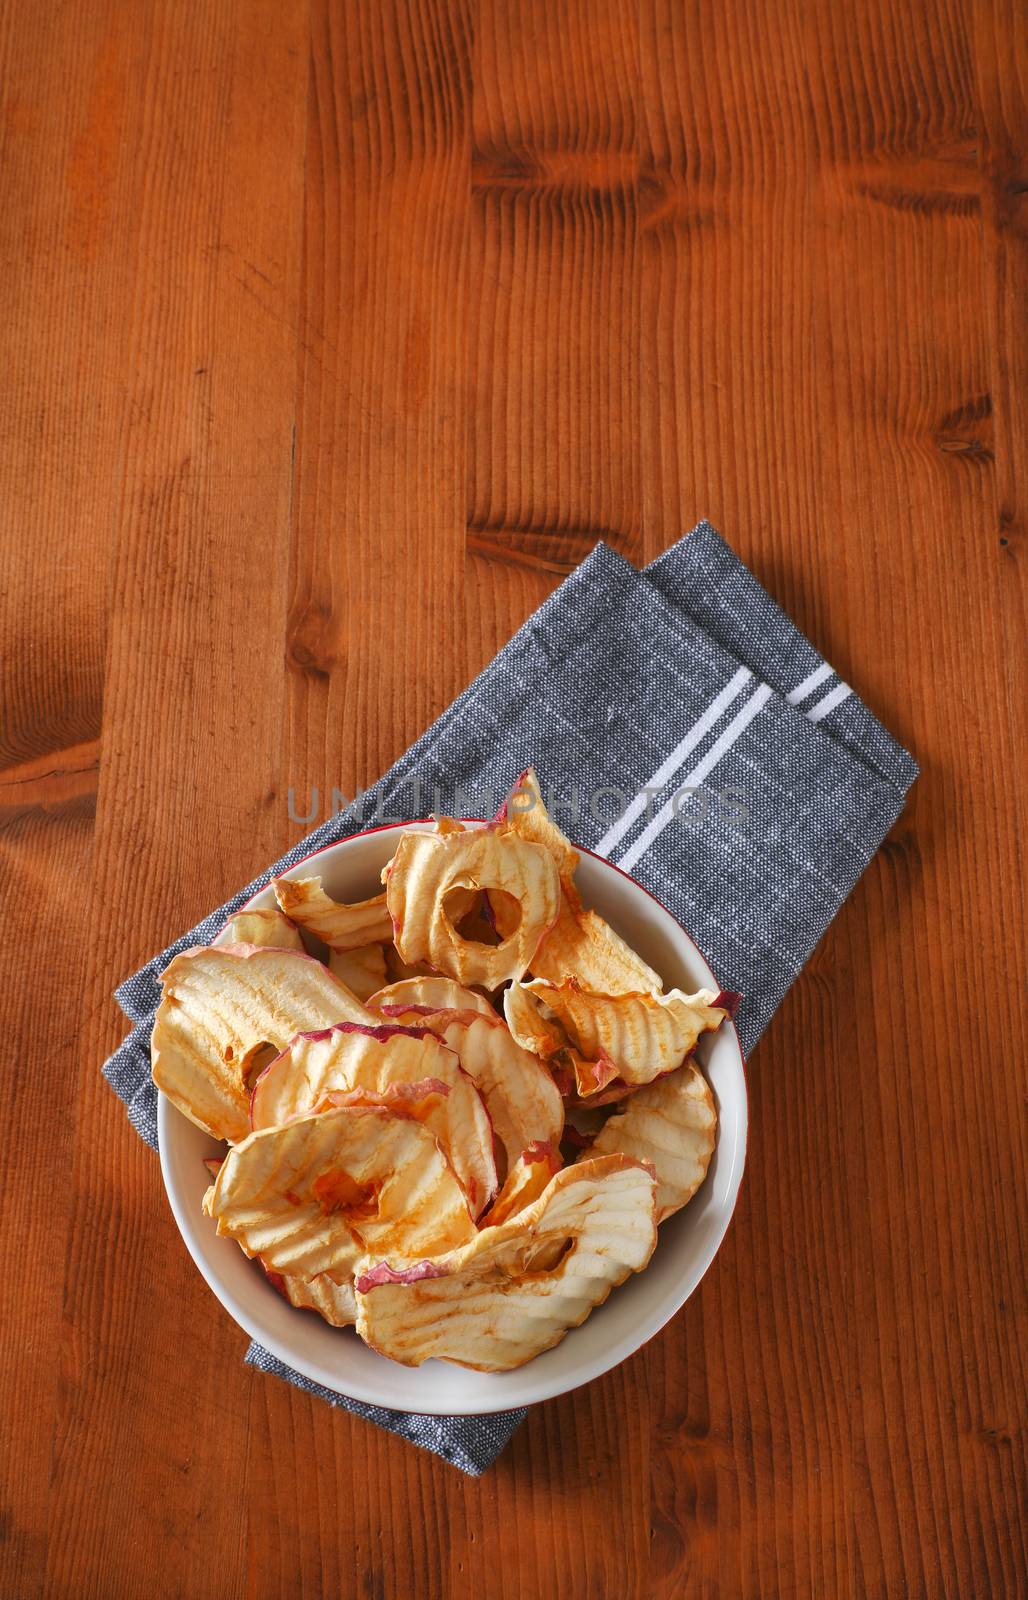 Bowl of dried apple slices - apple chips or rings - on gray napkin